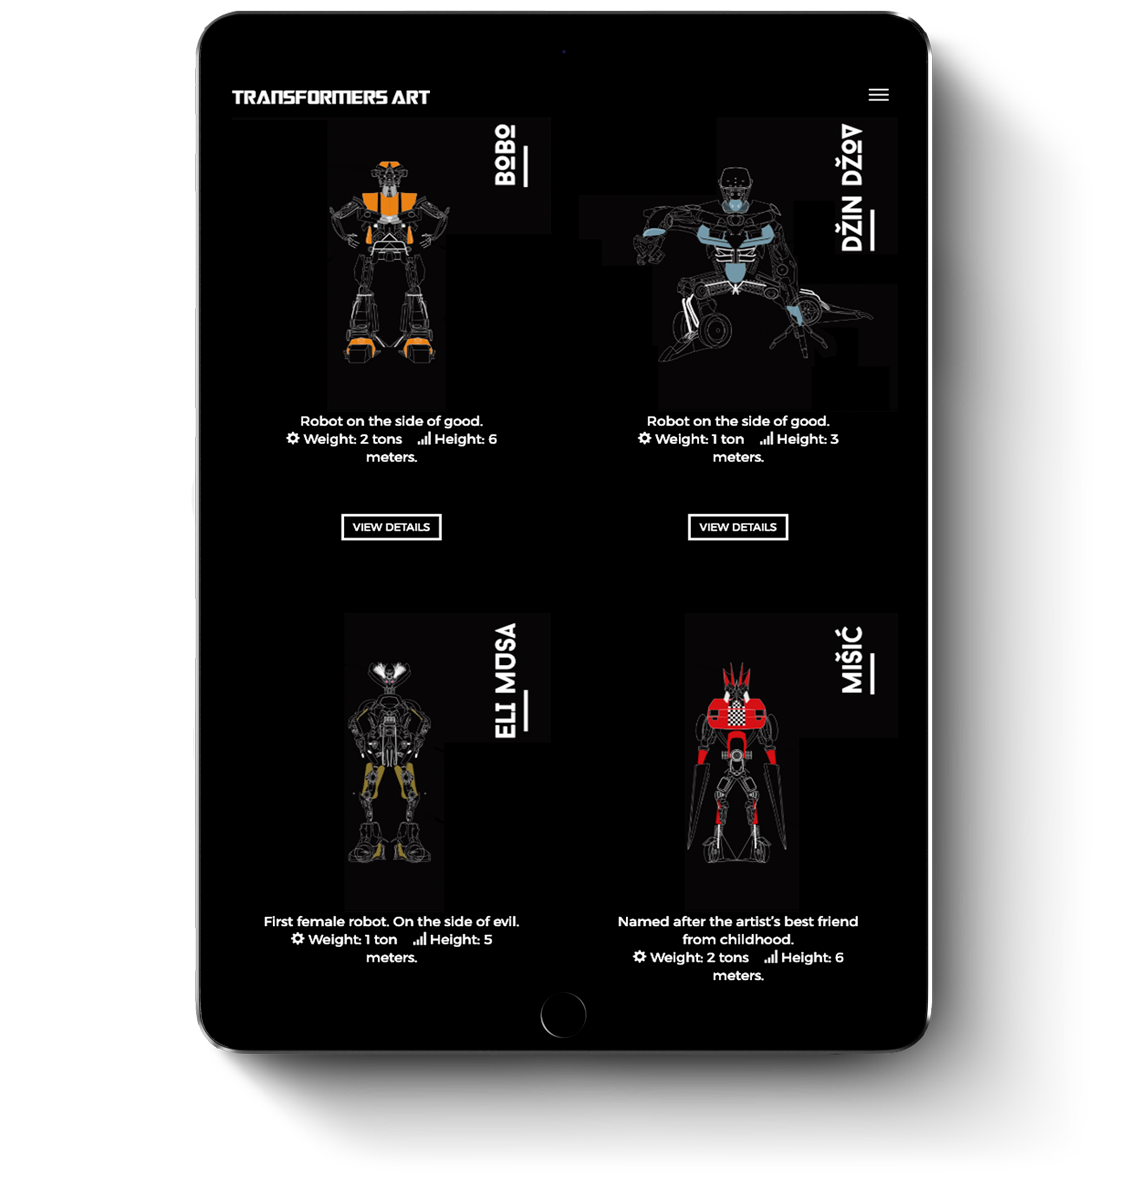 Web design for mobile devices and tablets of Transformers Art